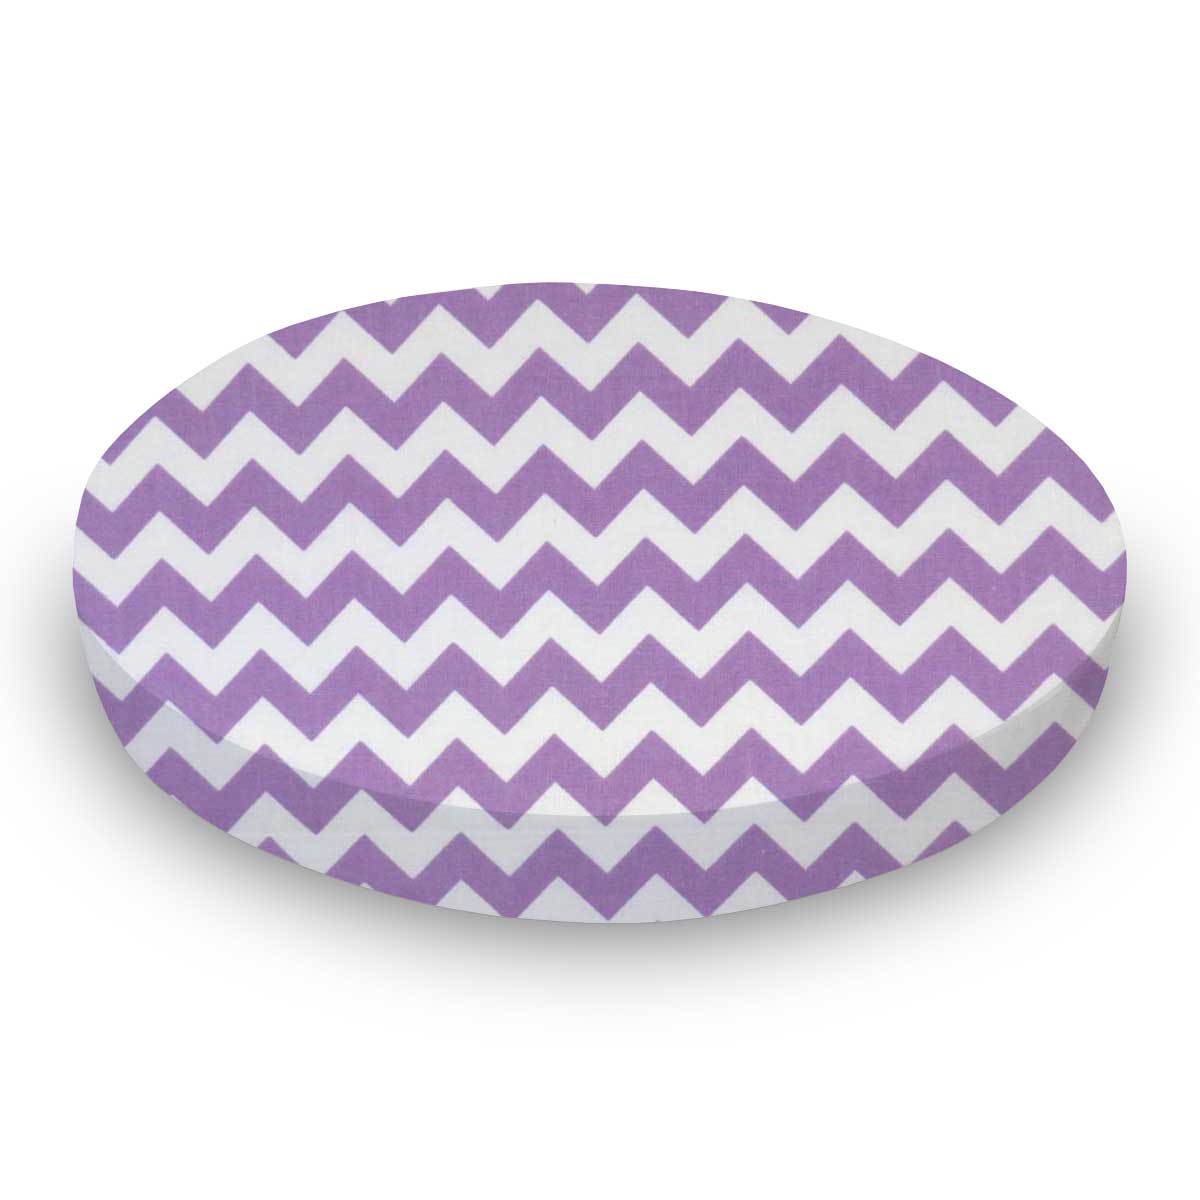 Oval (Stokke Mini) - Lilac Chevron Zigzag - Fitted  Oval